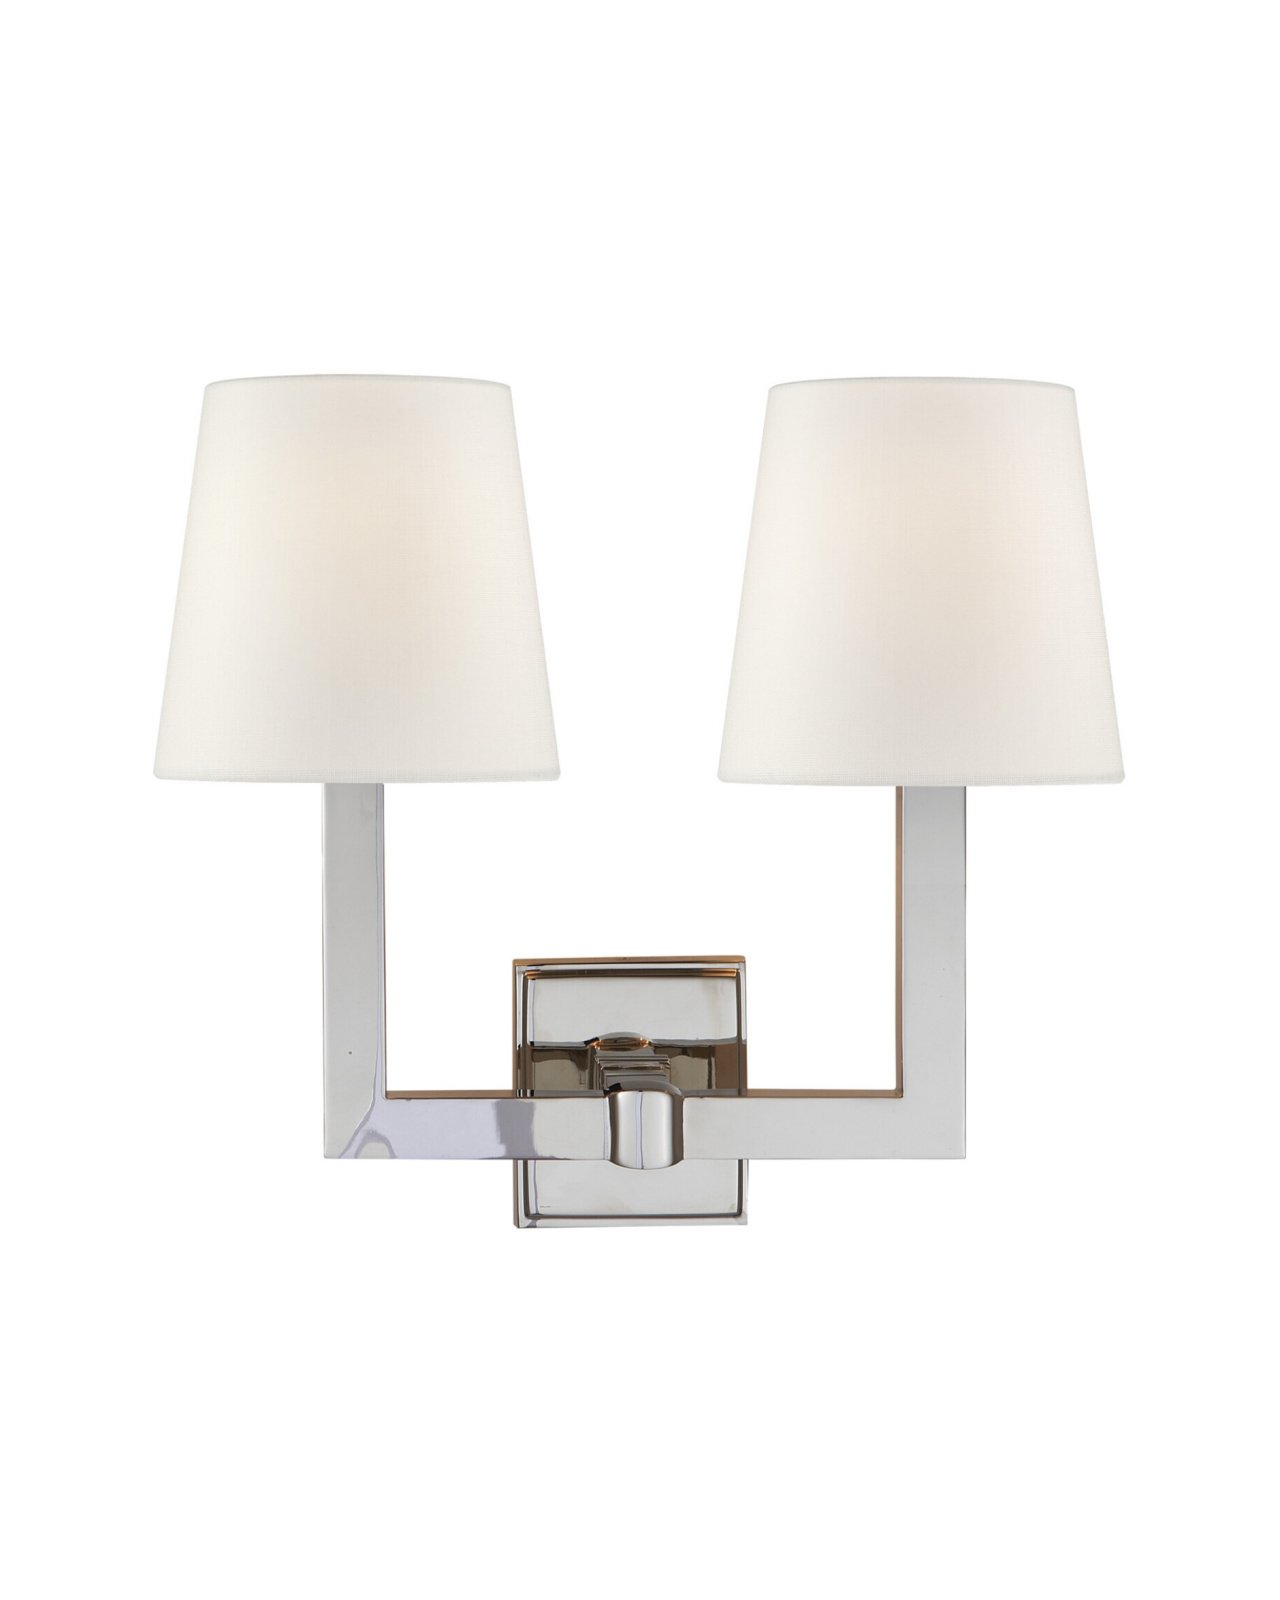 Square Tube Double Sconce Polished Nickel/Linen